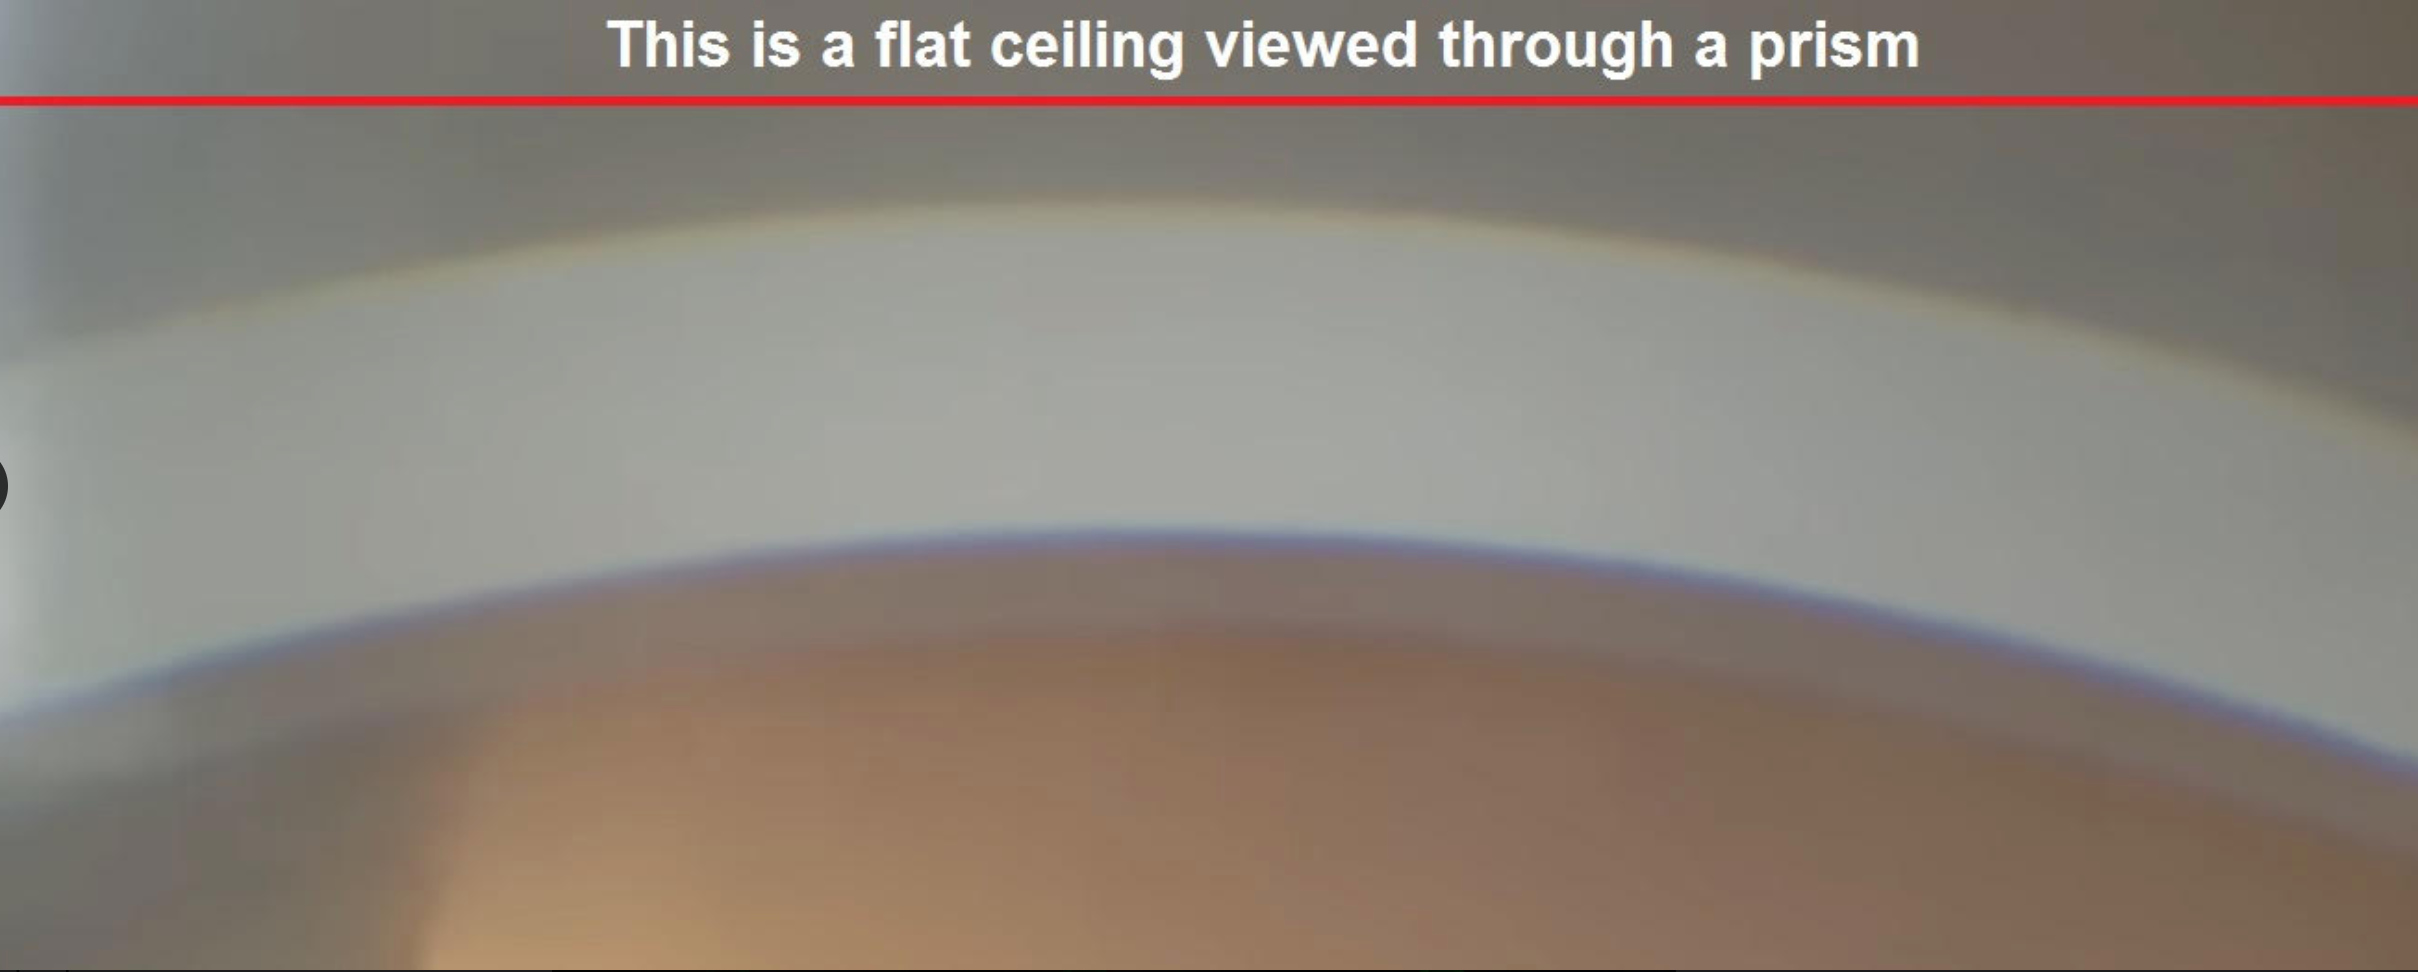 flat ceiling and prism.jpg